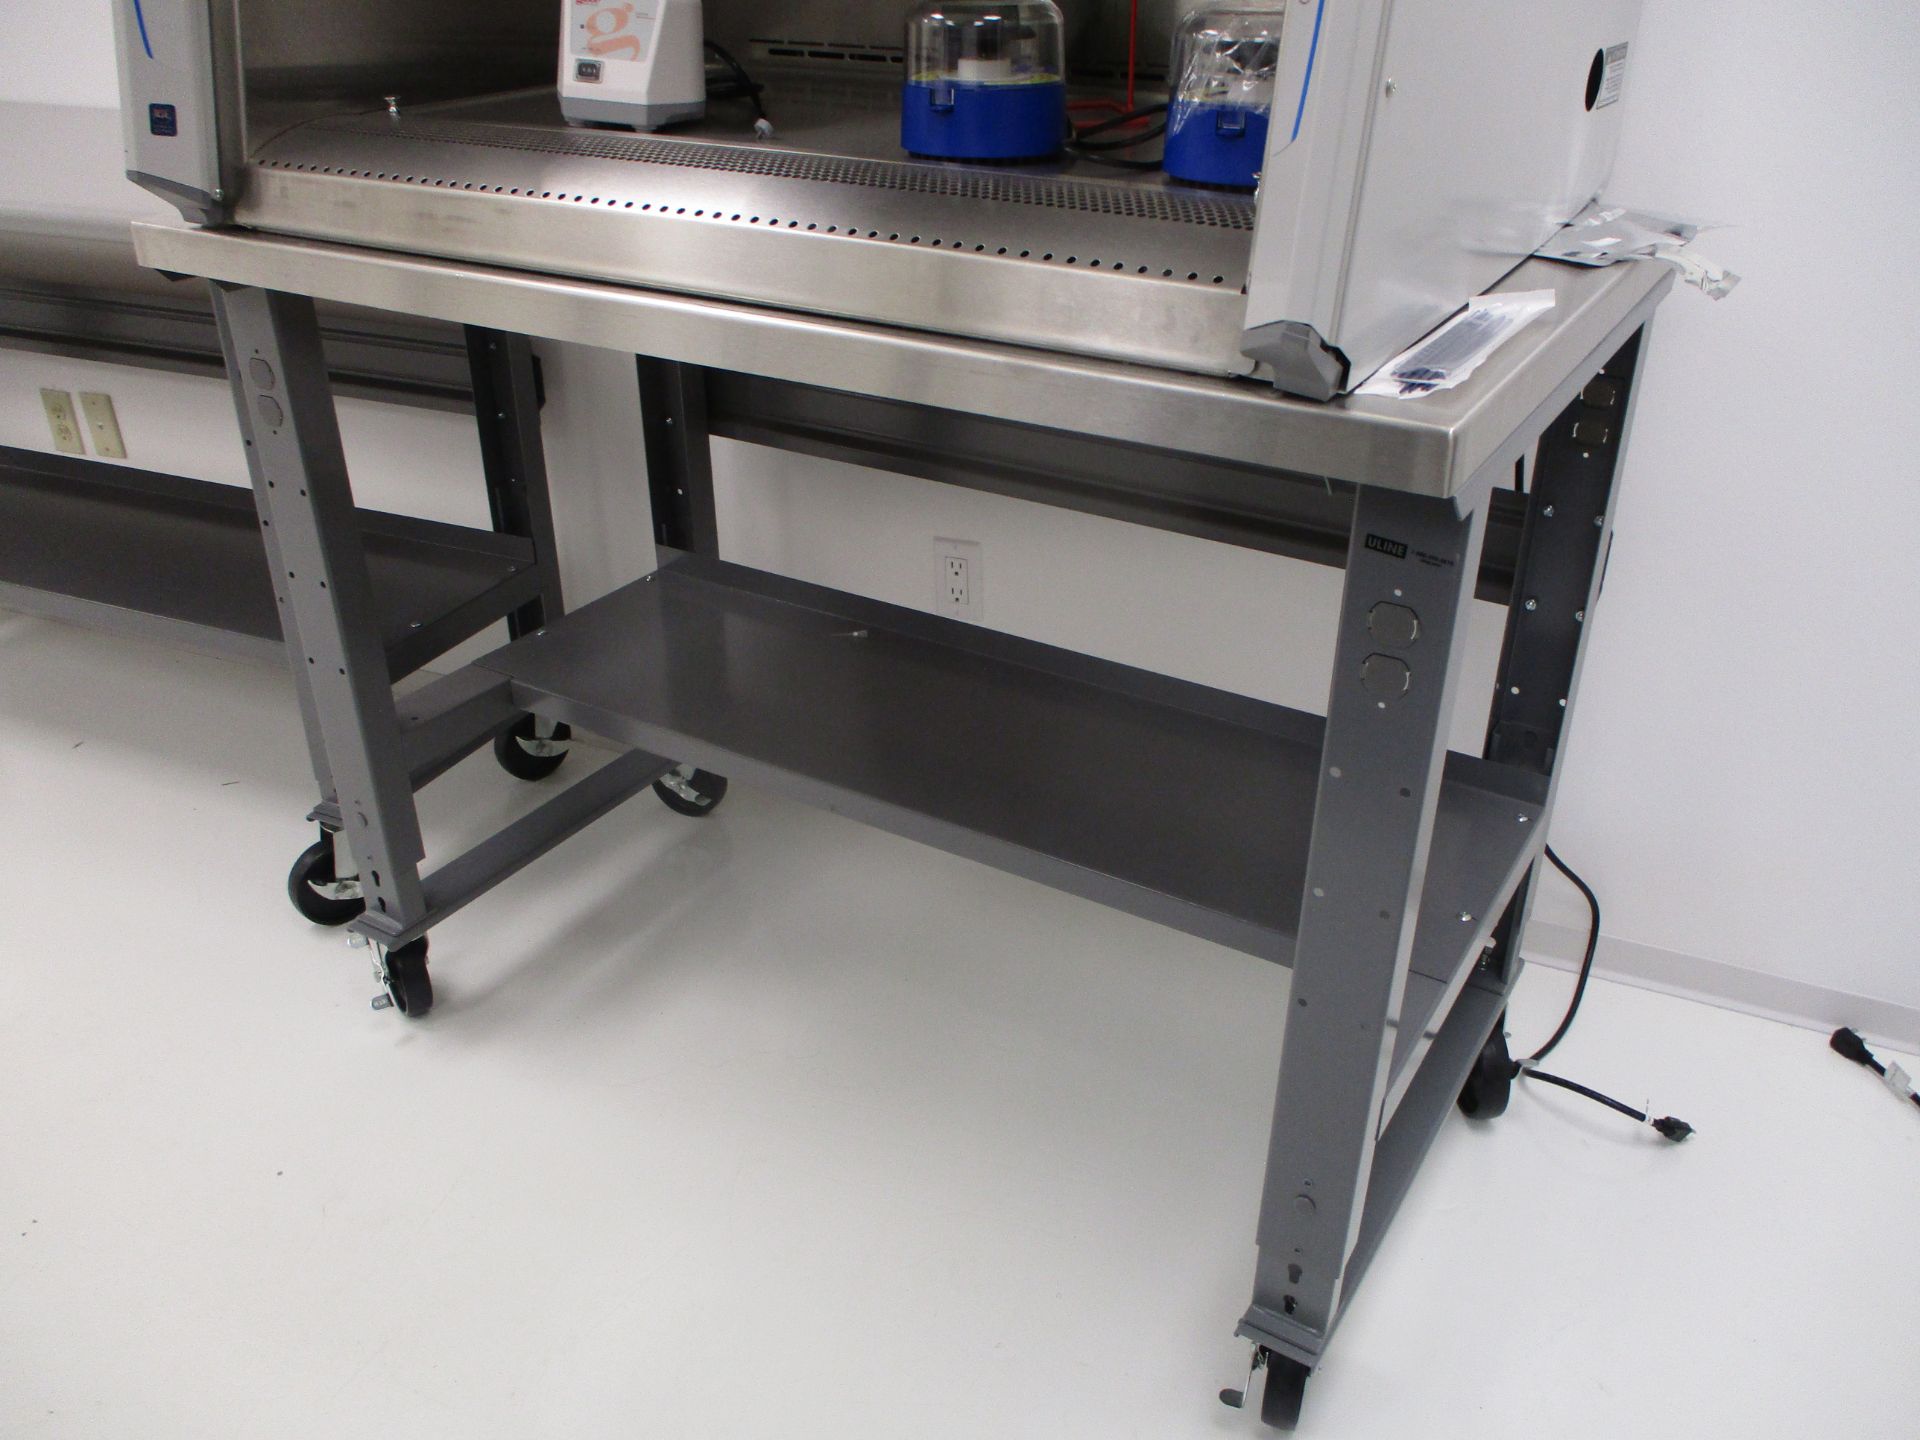 (2) Uline Work Tables with Stainless Steel Table Tops - Image 2 of 2